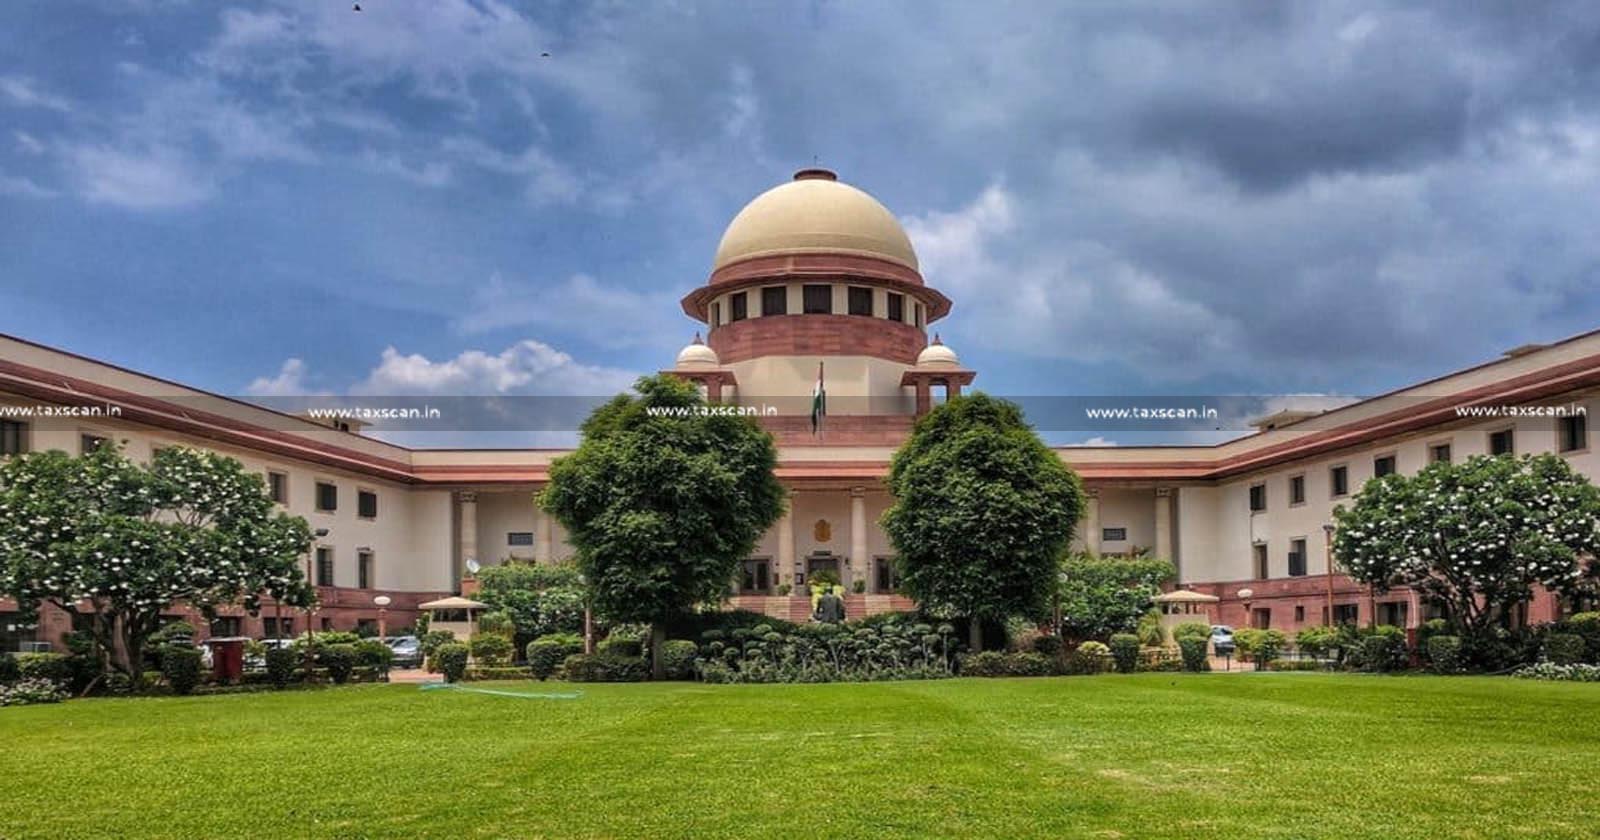 Taxability of Royalty - Foreign Companies - Supreme Court Upholds Legality of Engineering Analysis Case - SLP - Engineering Analysis Case - Supreme Court - taxscan